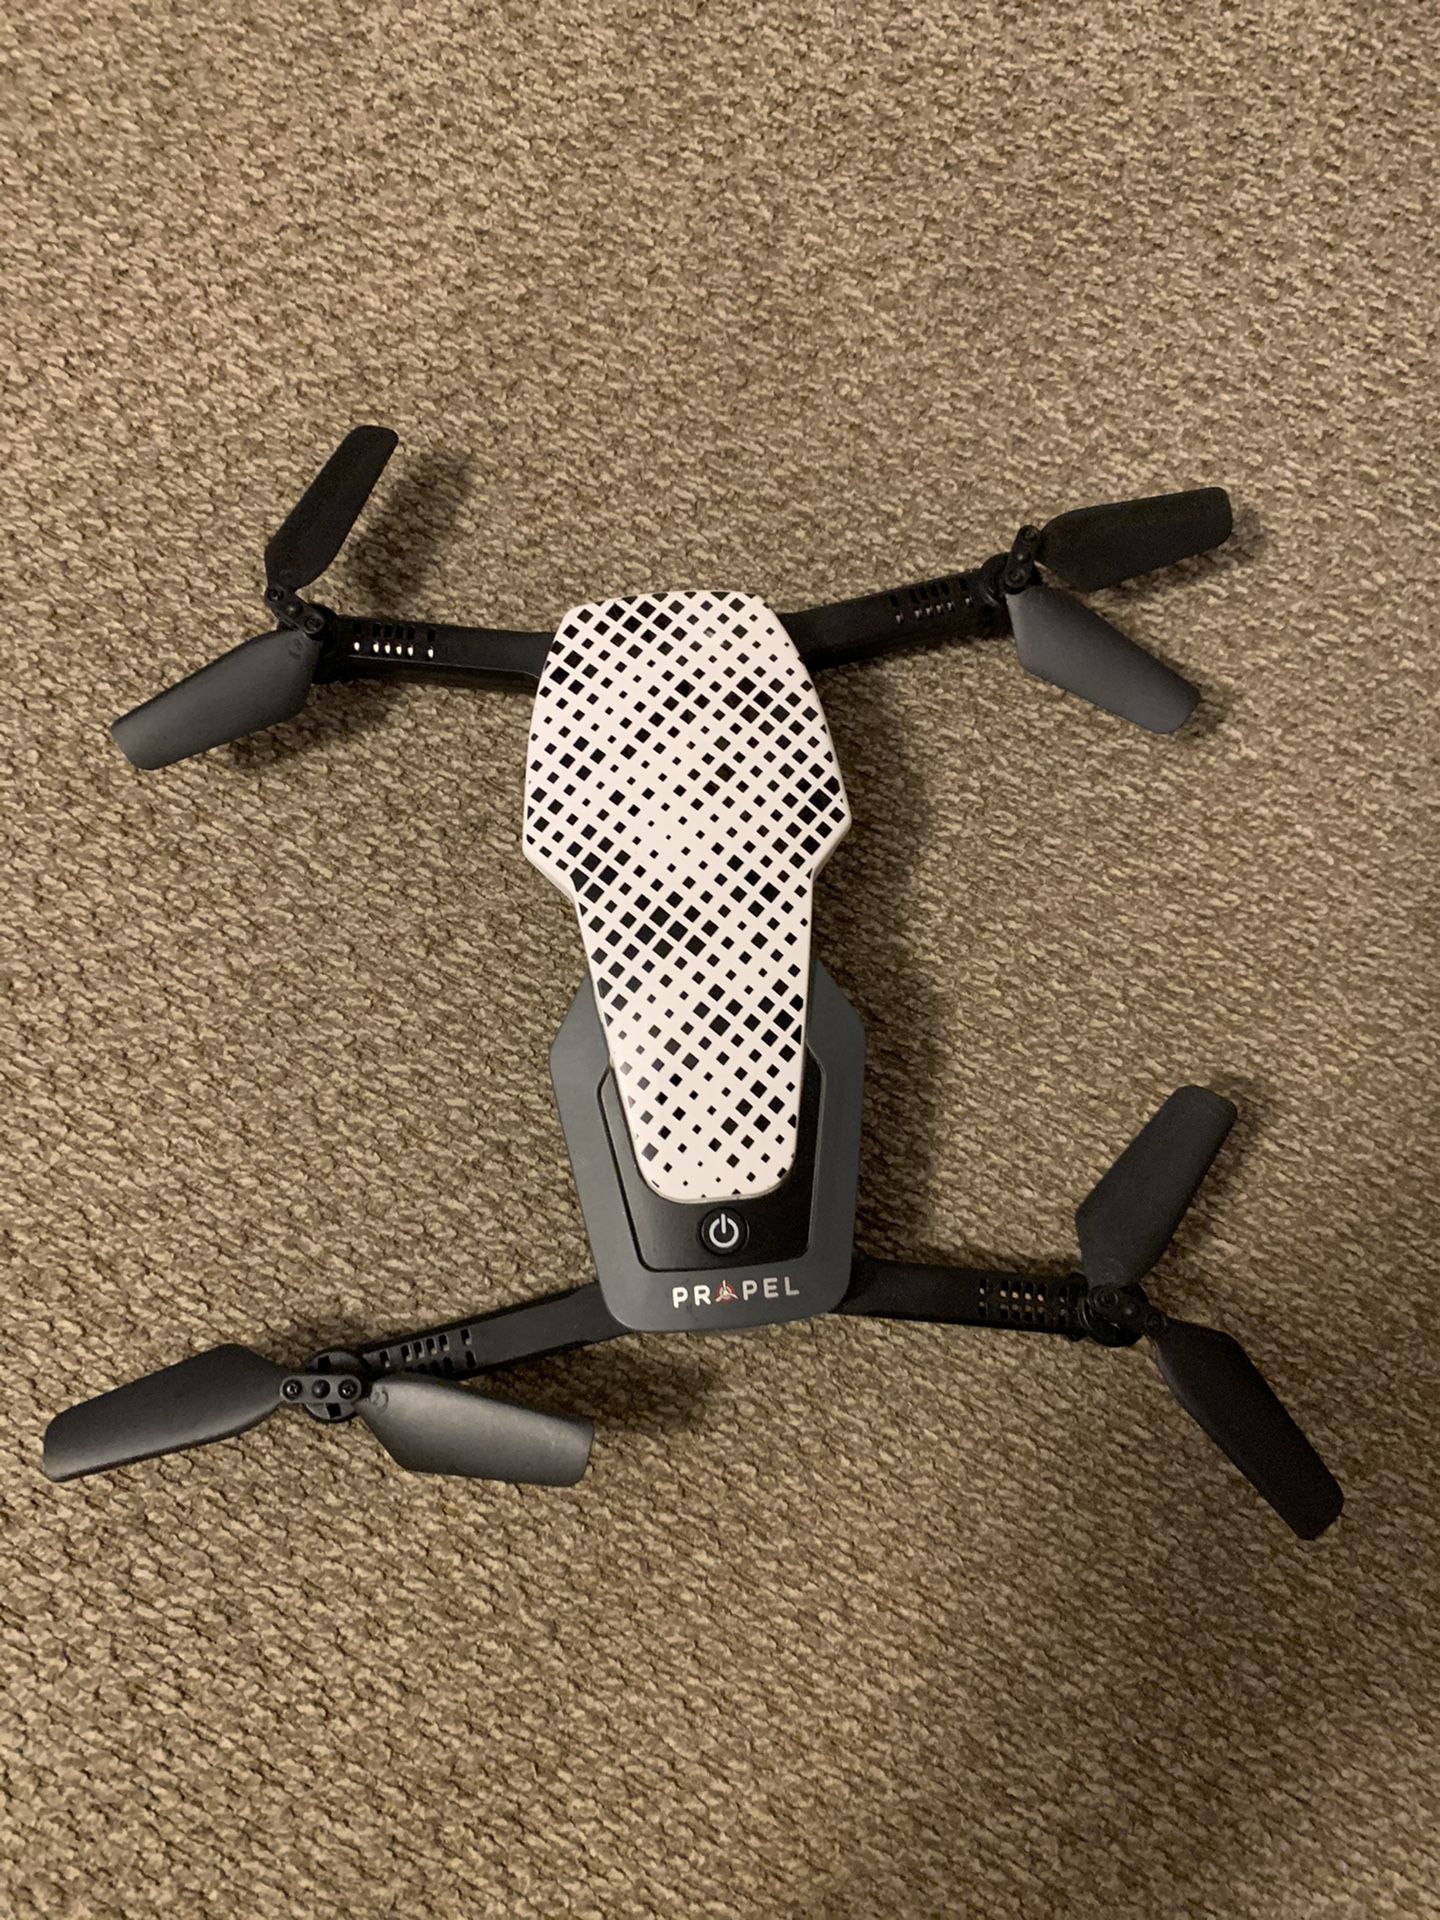 Propel Drone with Camera